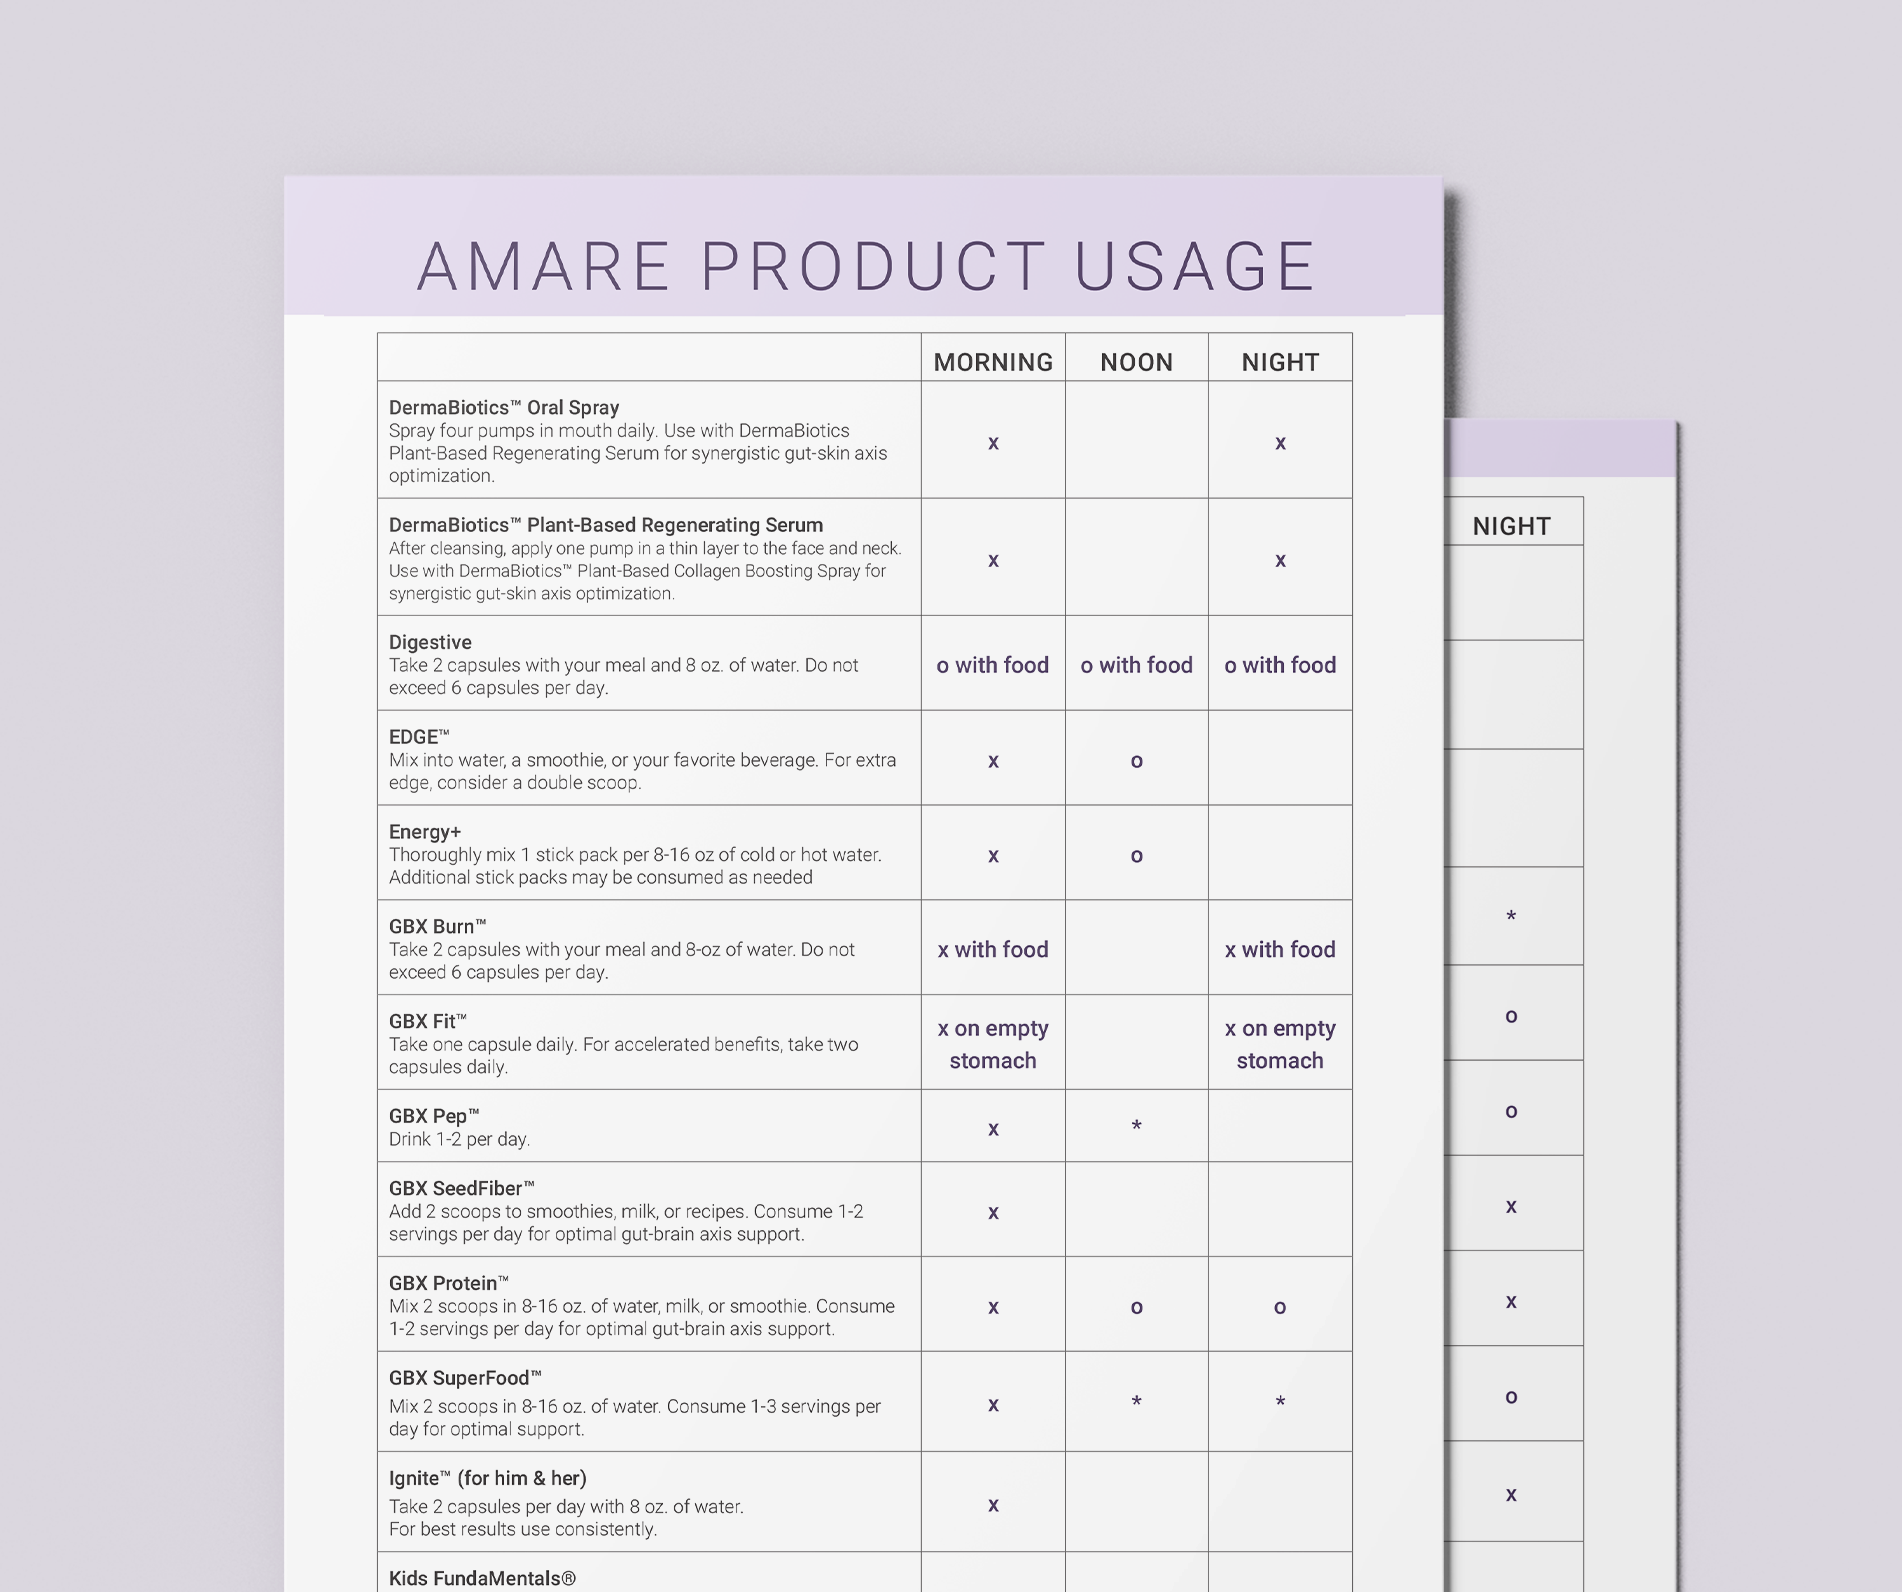 Product Recommendation Usage and Dosage